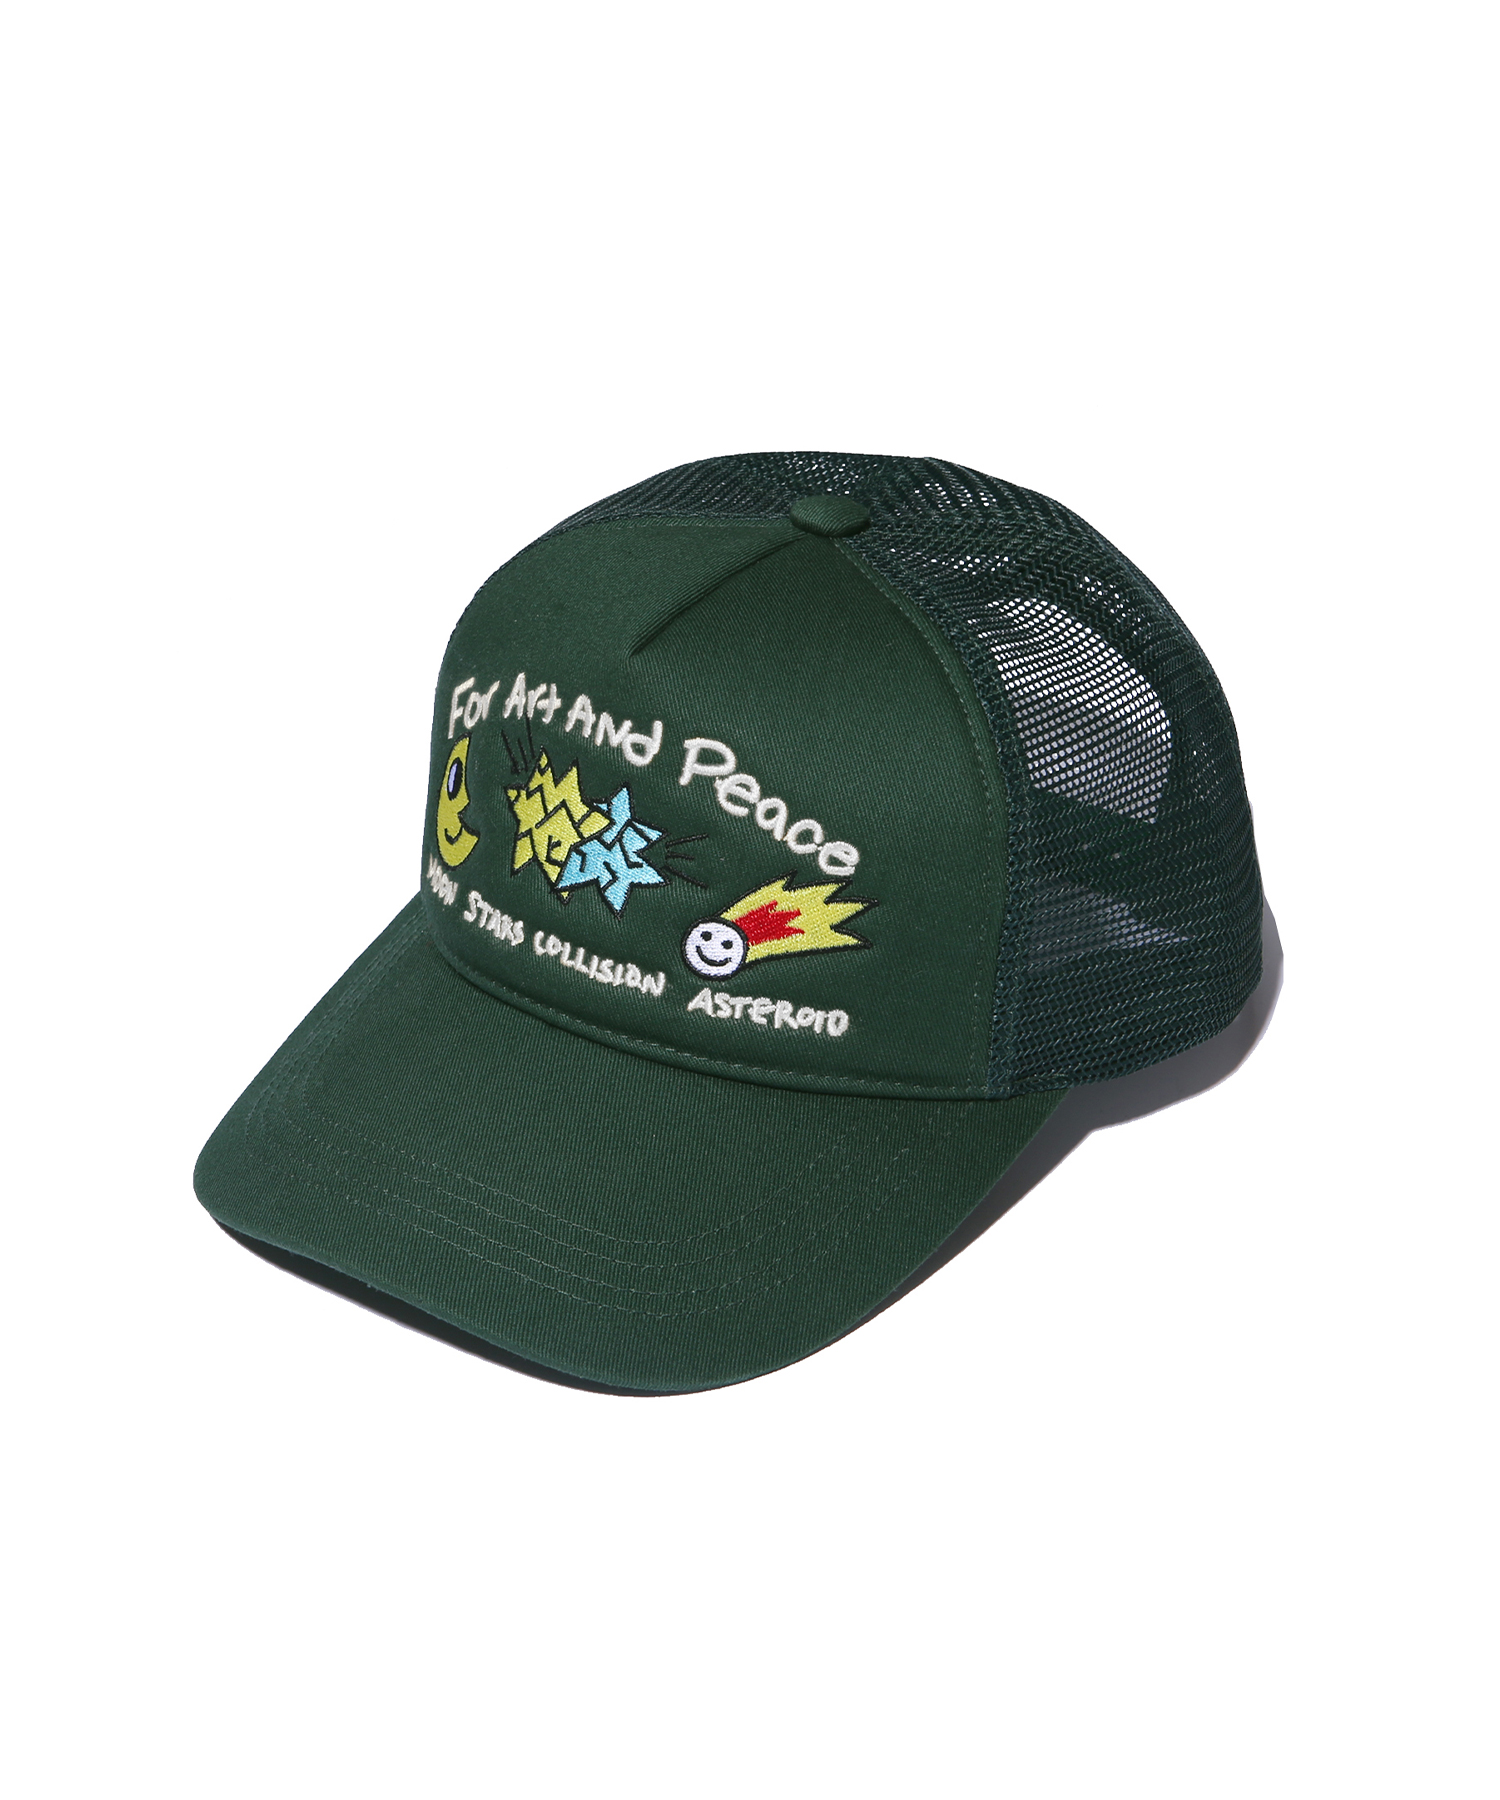 FOR ART AND PEACE MASH CAP GREEN